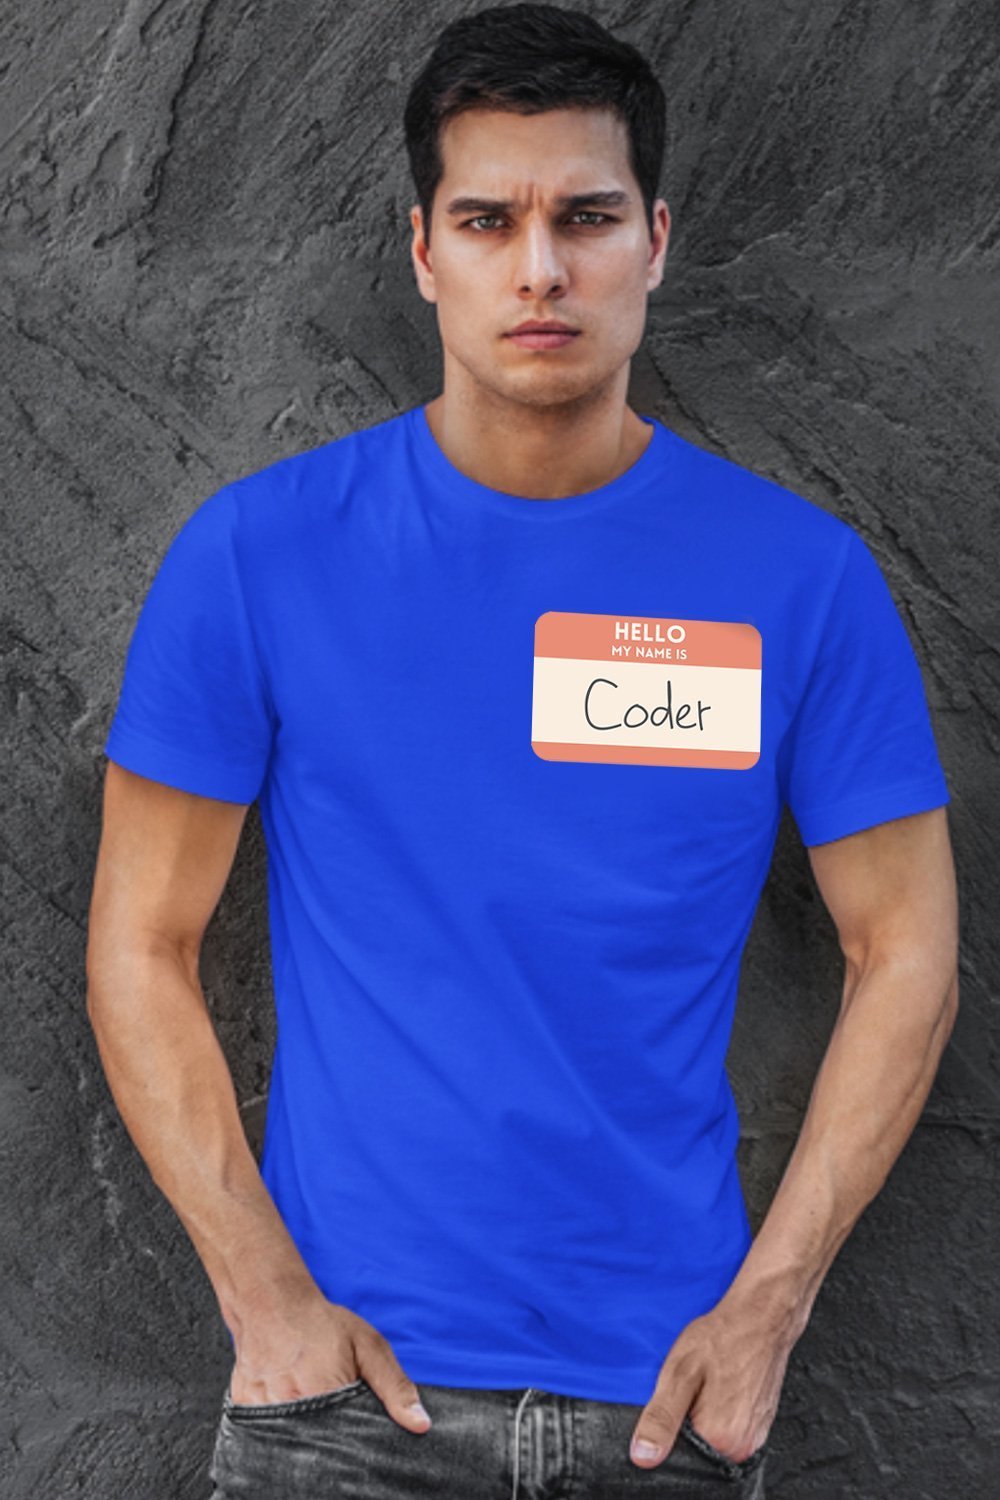 My Name Is Coder - Name Tag Graphic On A Blue Cotton TShirt